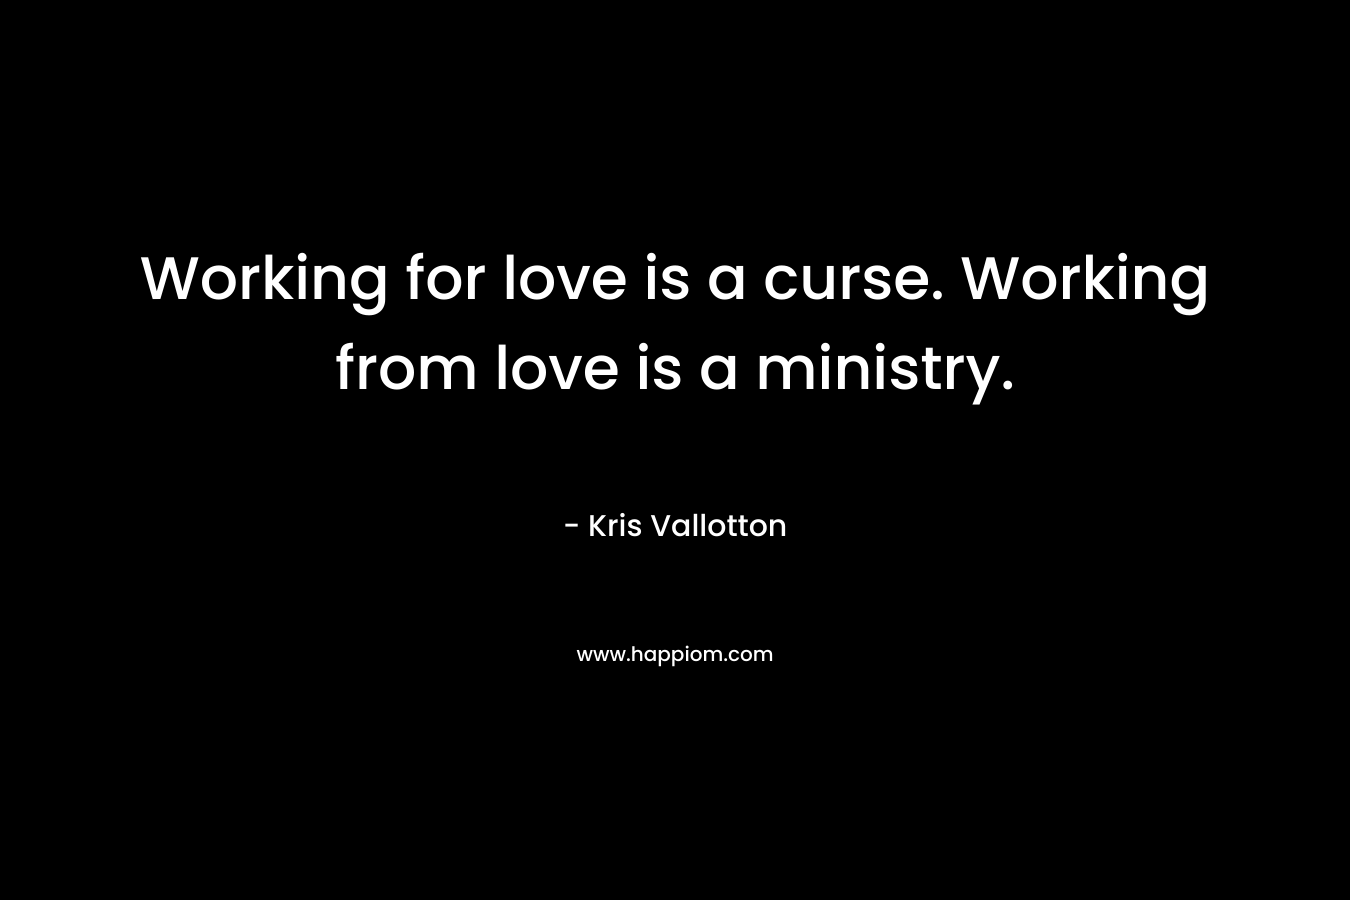 Working for love is a curse. Working from love is a ministry.